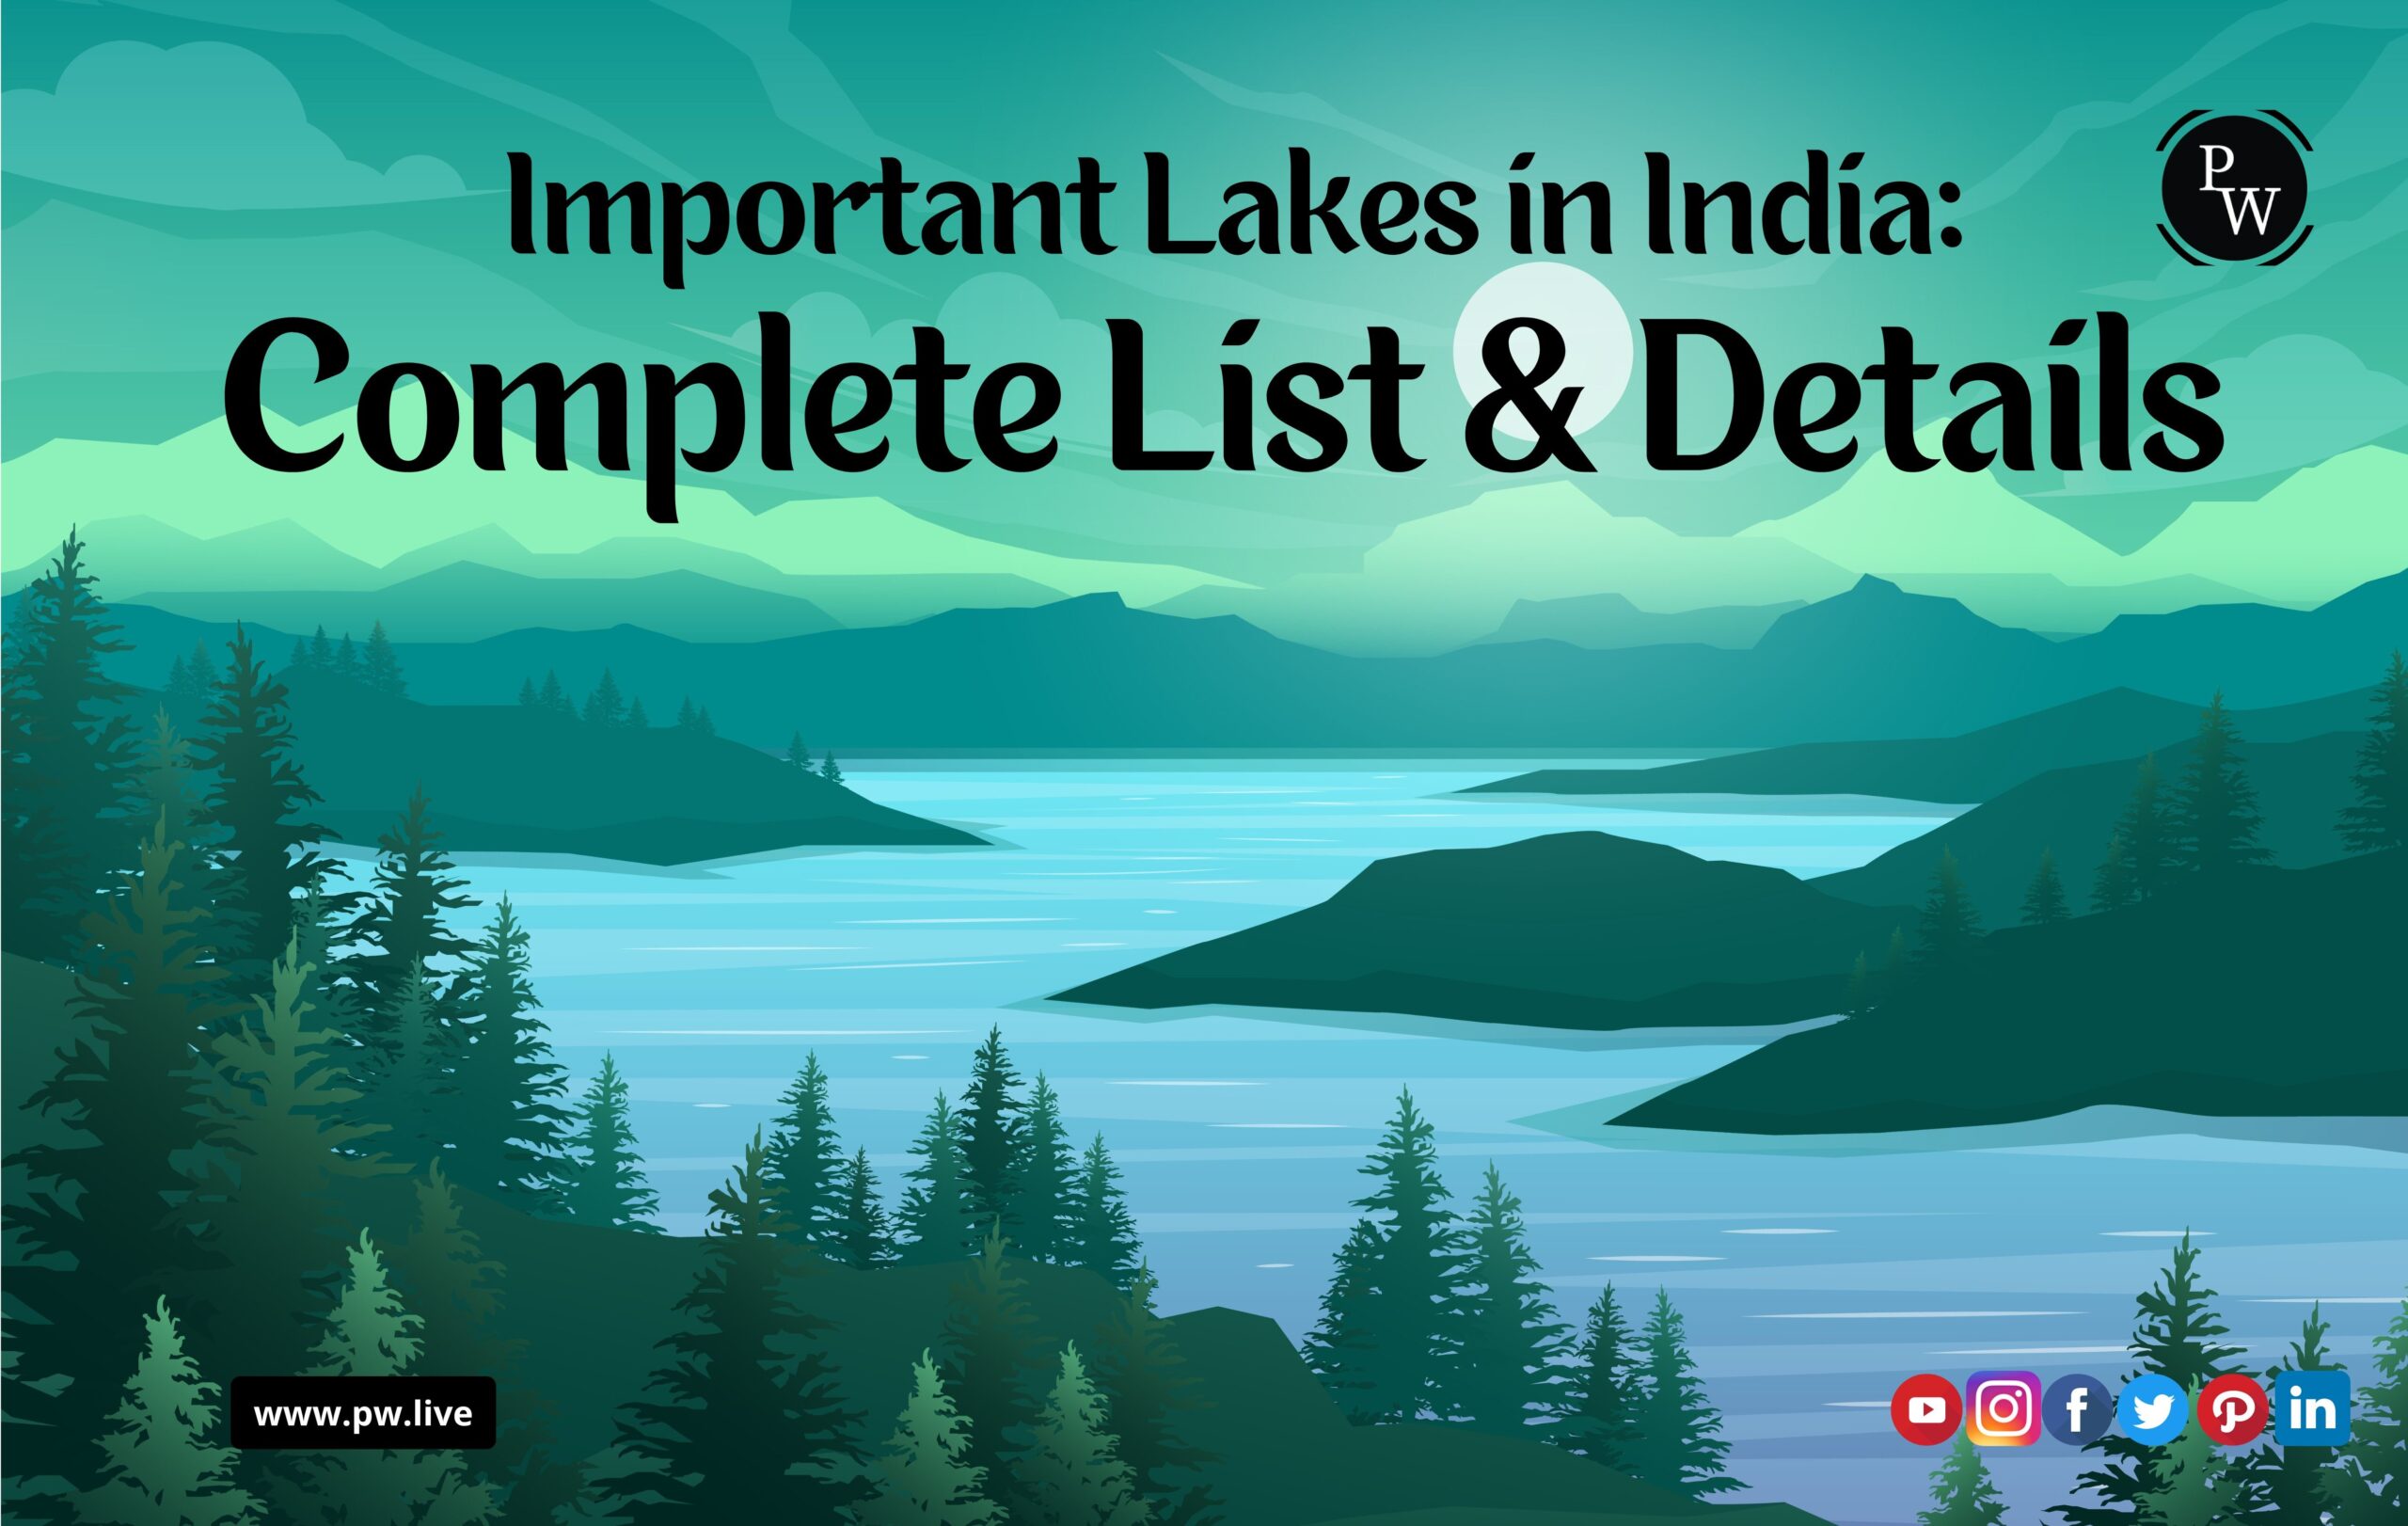 Important Lakes in India: Complete List & Details